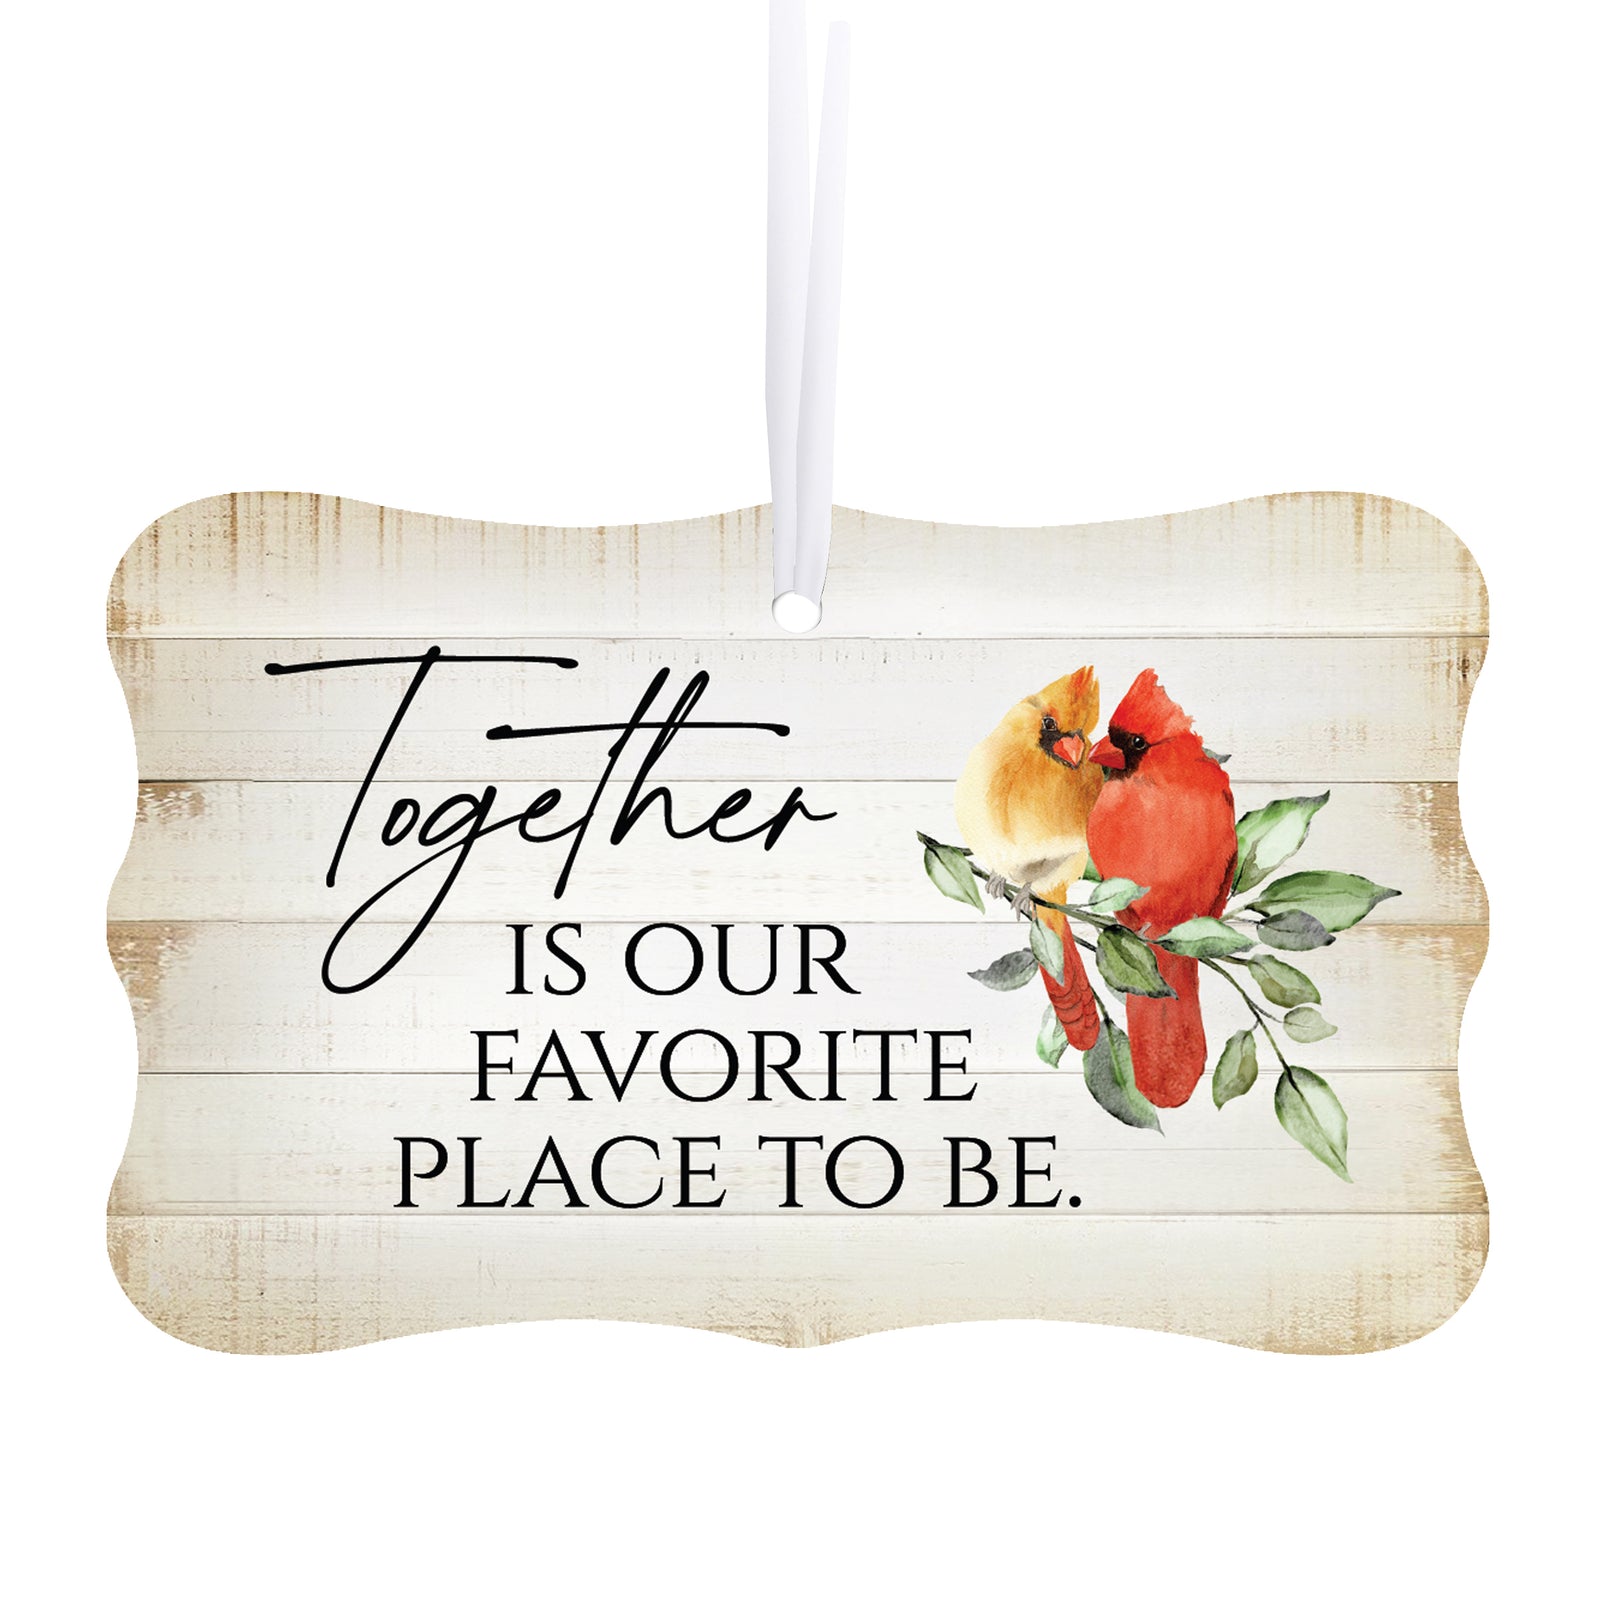 Rustic Scalloped Cardinal Wooden Ornament With Everyday Verses Gift Ideas - Together Is Our